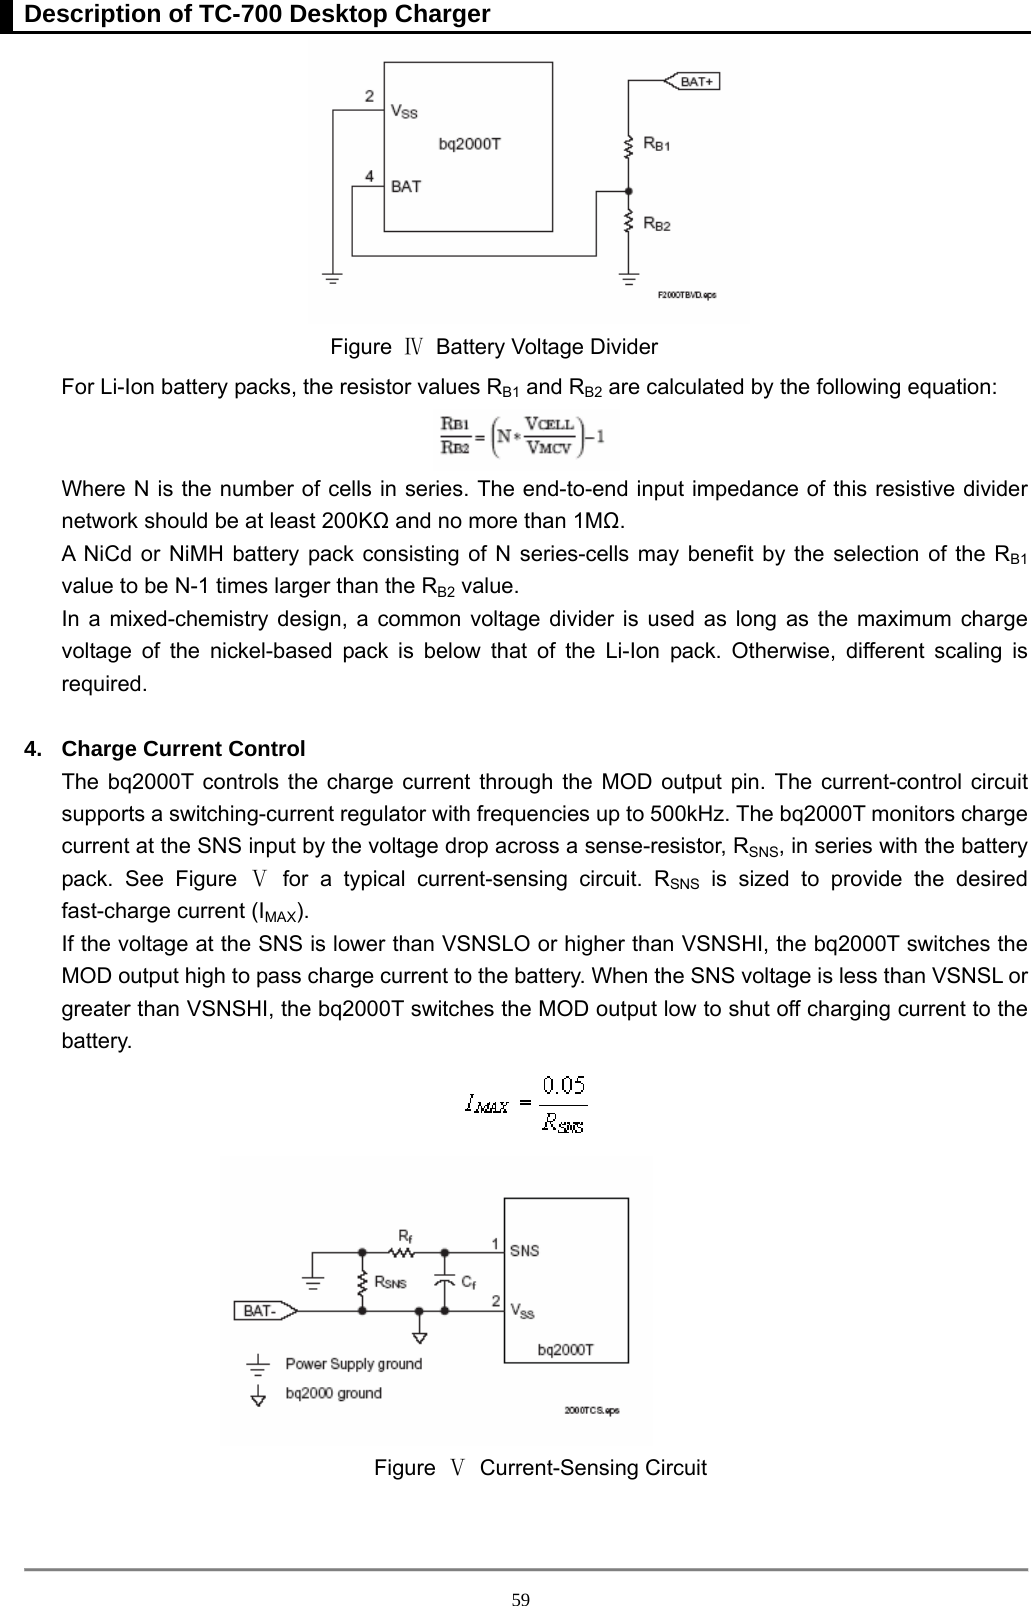 Description of TC-700 Desktop Charger  59 Figure  Ⅳ  Battery Voltage Divider   For Li-Ion battery packs, the resistor values RB1 and RB2 are calculated by the following equation:    Where N is the number of cells in series. The end-to-end input impedance of this resistive divider network should be at least 200KΩ and no more than 1MΩ. A NiCd or NiMH battery pack consisting of N series-cells may benefit by the selection of the RB1 value to be N-1 times larger than the RB2 value.   In a mixed-chemistry design, a common voltage divider is used as long as the maximum charge voltage of the nickel-based pack is below that of the Li-Ion pack. Otherwise, different scaling is required.   4.  Charge Current Control The bq2000T controls the charge current through the MOD output pin. The current-control circuit supports a switching-current regulator with frequencies up to 500kHz. The bq2000T monitors charge current at the SNS input by the voltage drop across a sense-resistor, RSNS, in series with the battery pack. See Figure Ⅴ for a typical current-sensing circuit. RSNS is sized to provide the desired fast-charge current (IMAX). If the voltage at the SNS is lower than VSNSLO or higher than VSNSHI, the bq2000T switches the MOD output high to pass charge current to the battery. When the SNS voltage is less than VSNSL or greater than VSNSHI, the bq2000T switches the MOD output low to shut off charging current to the battery.    Figure  Ⅴ Current-Sensing Circuit 